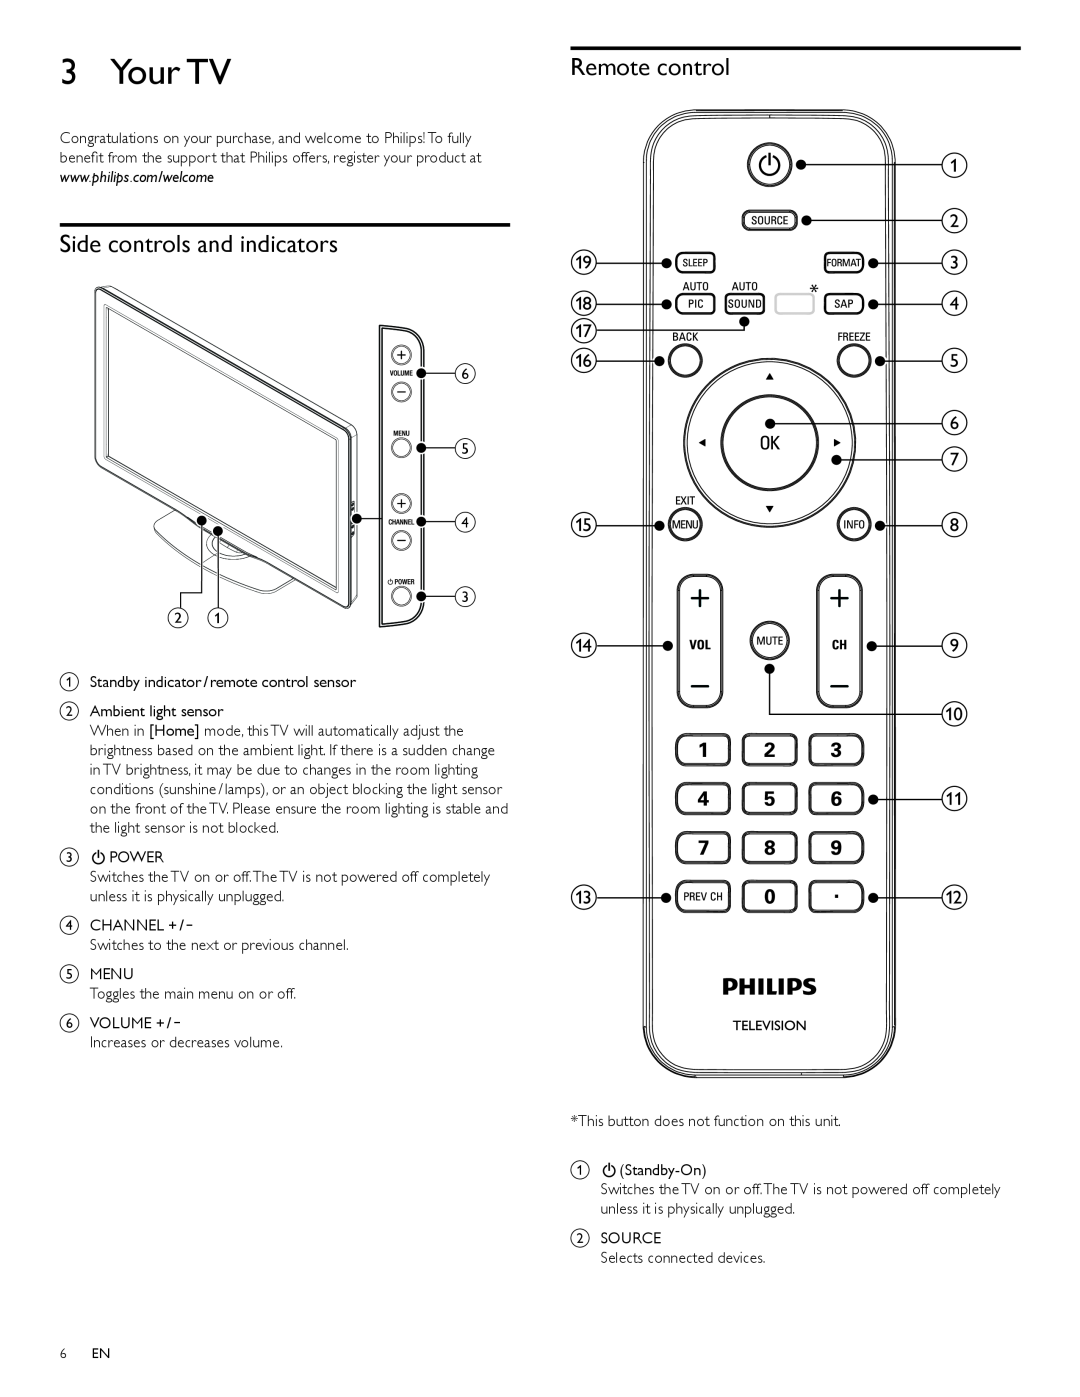 Philips 40PFL3505D, 40PFL3705D, 46PFL3705D user manual Your TV, Side controls and indicators, Remote control 